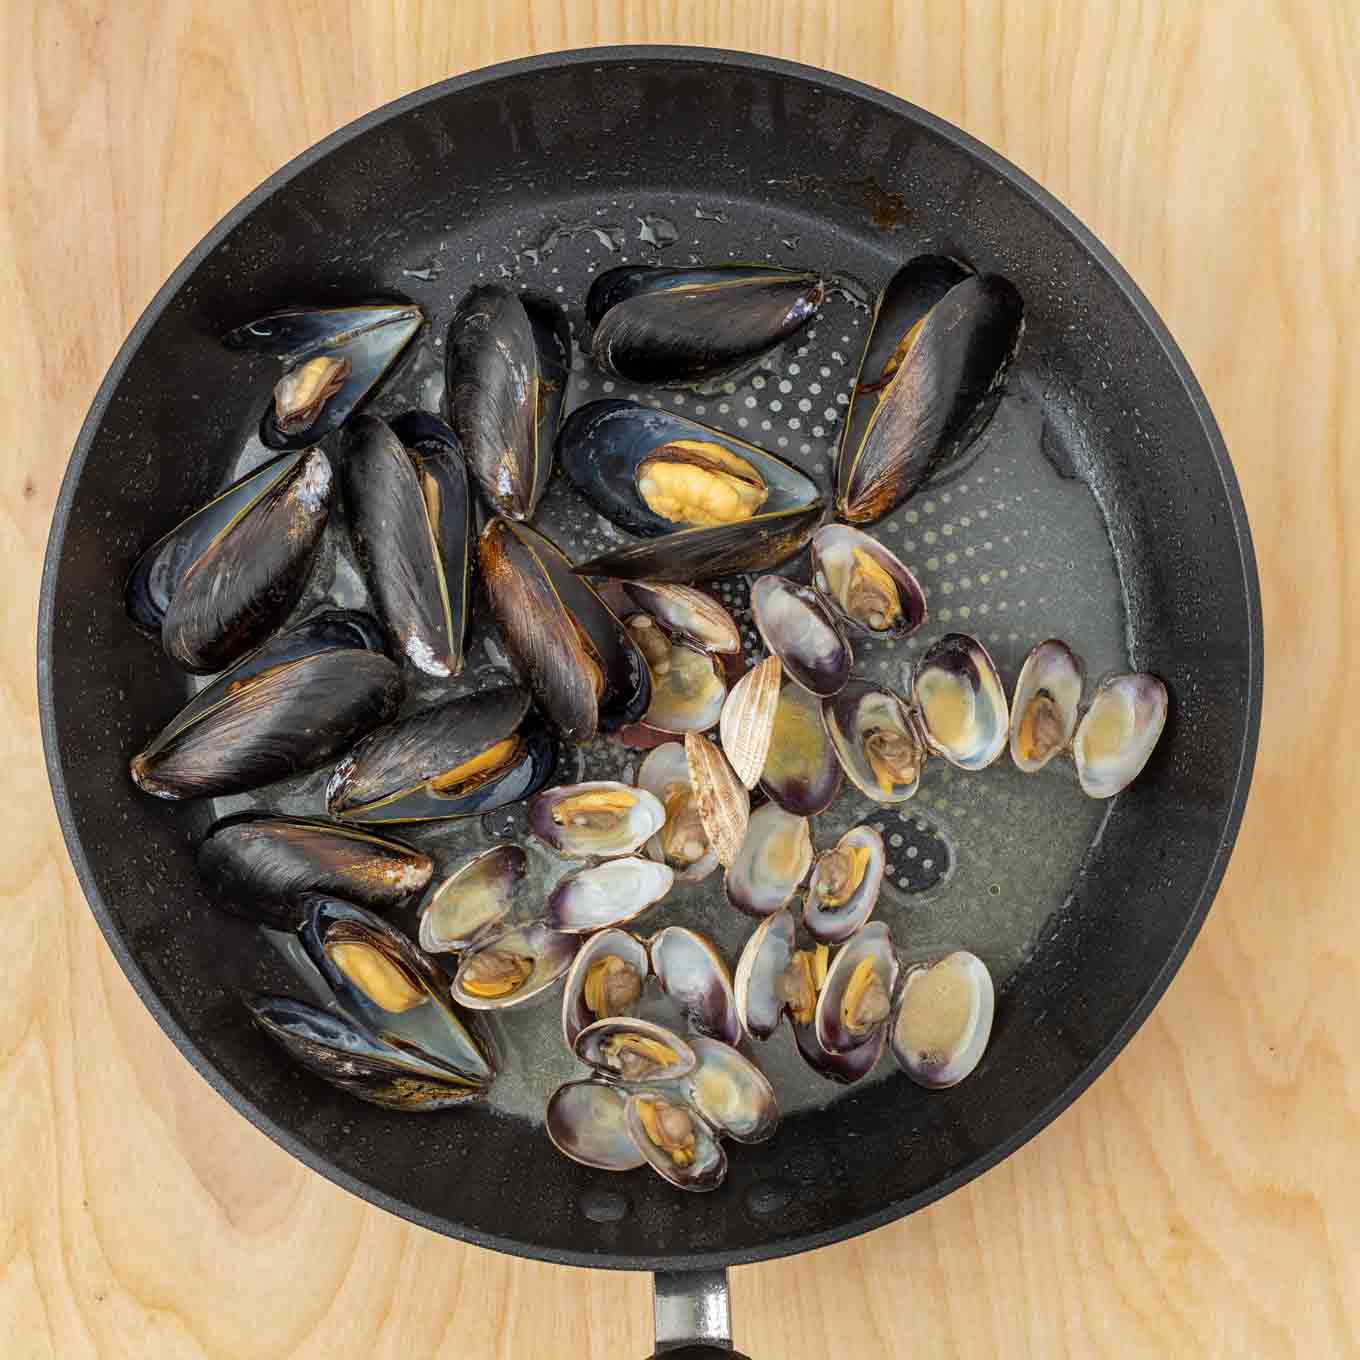 mussels and clams in a pan